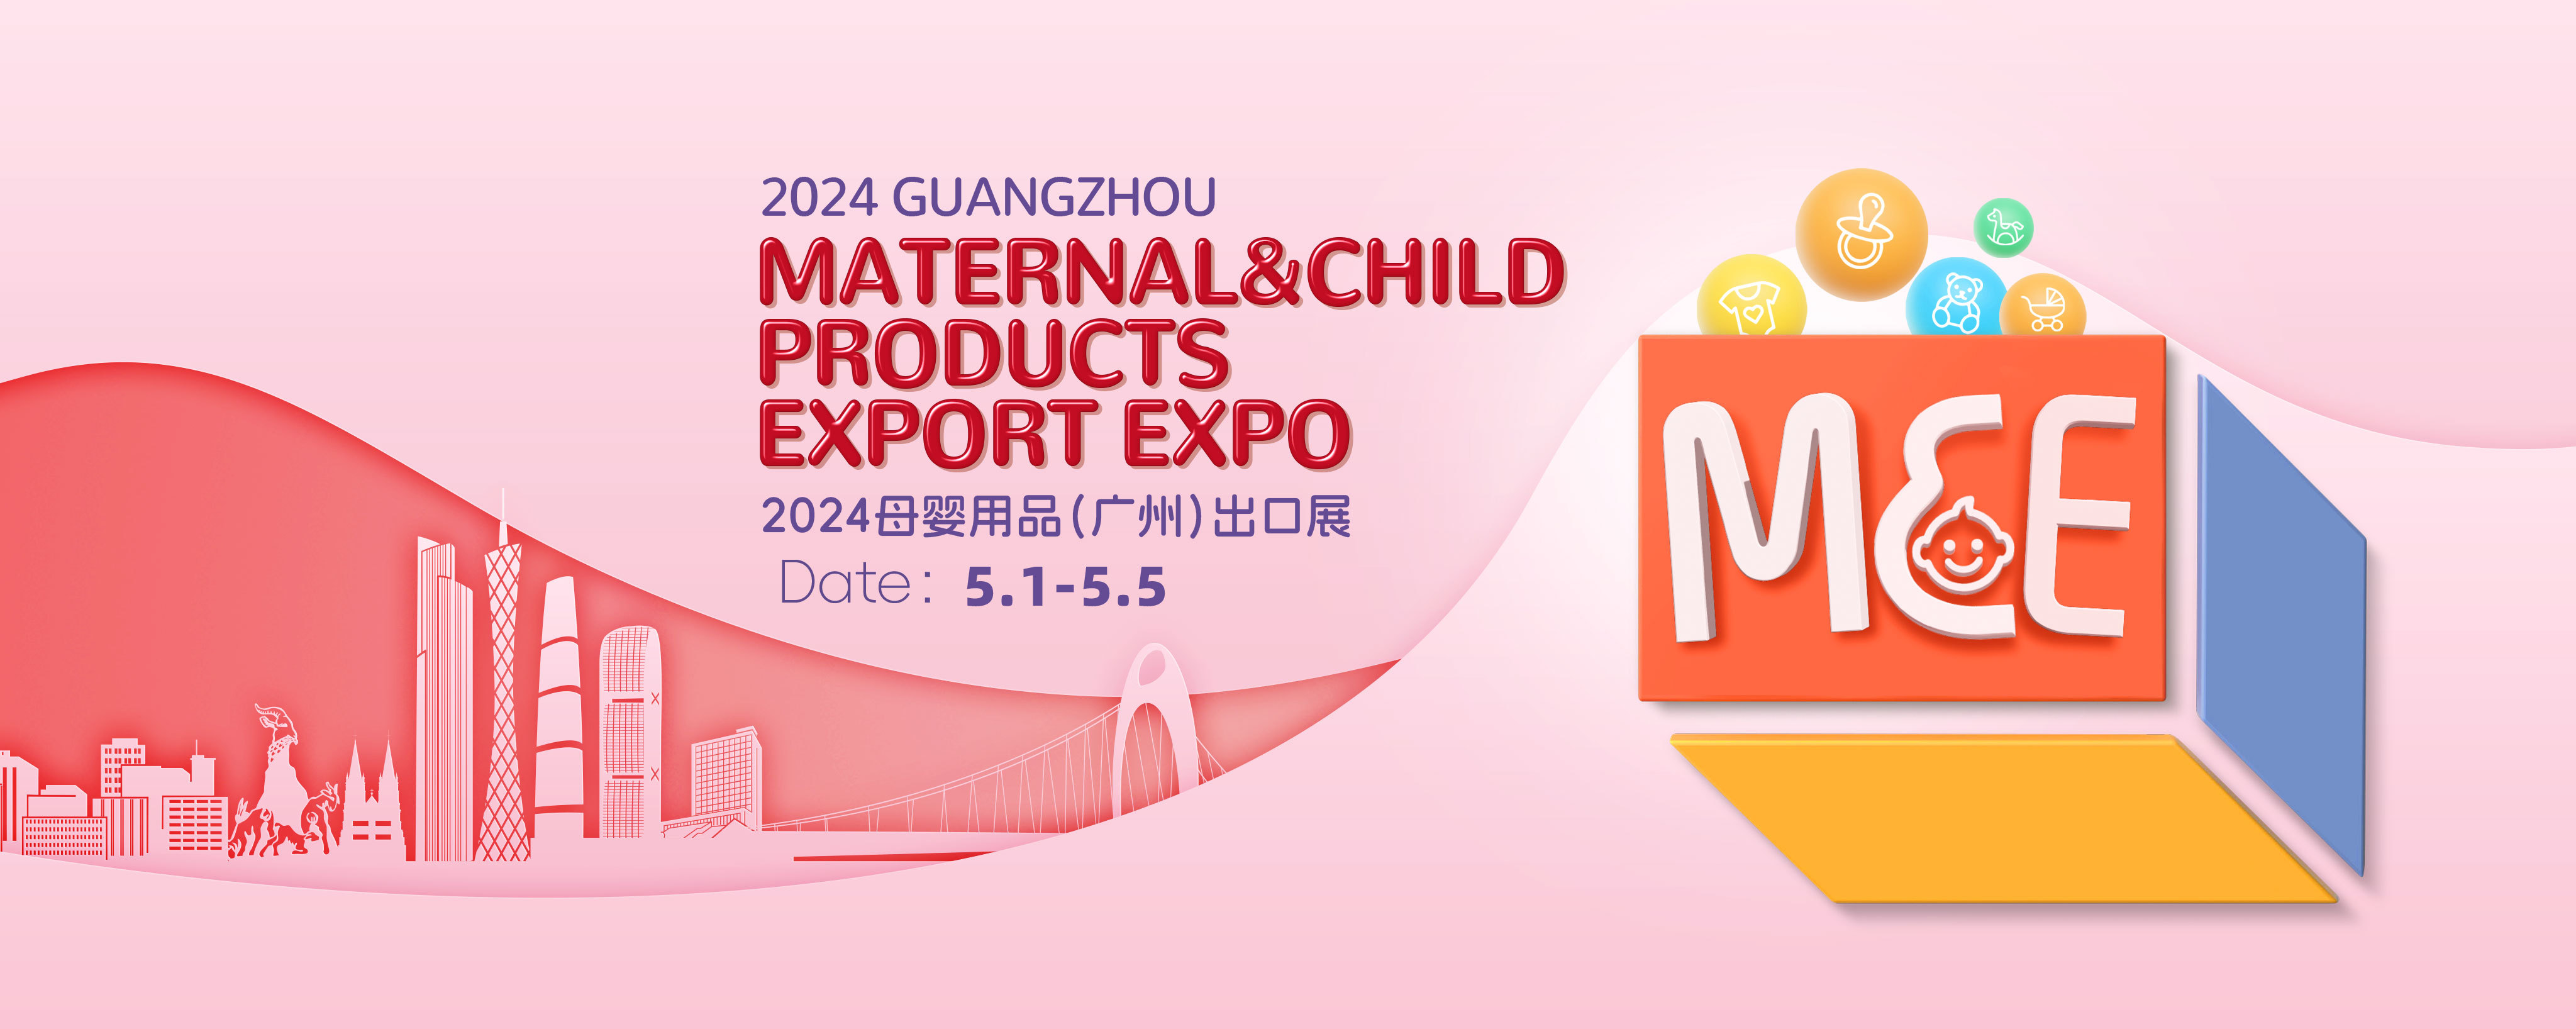 2024 Guangzhou maternal&child products export expo